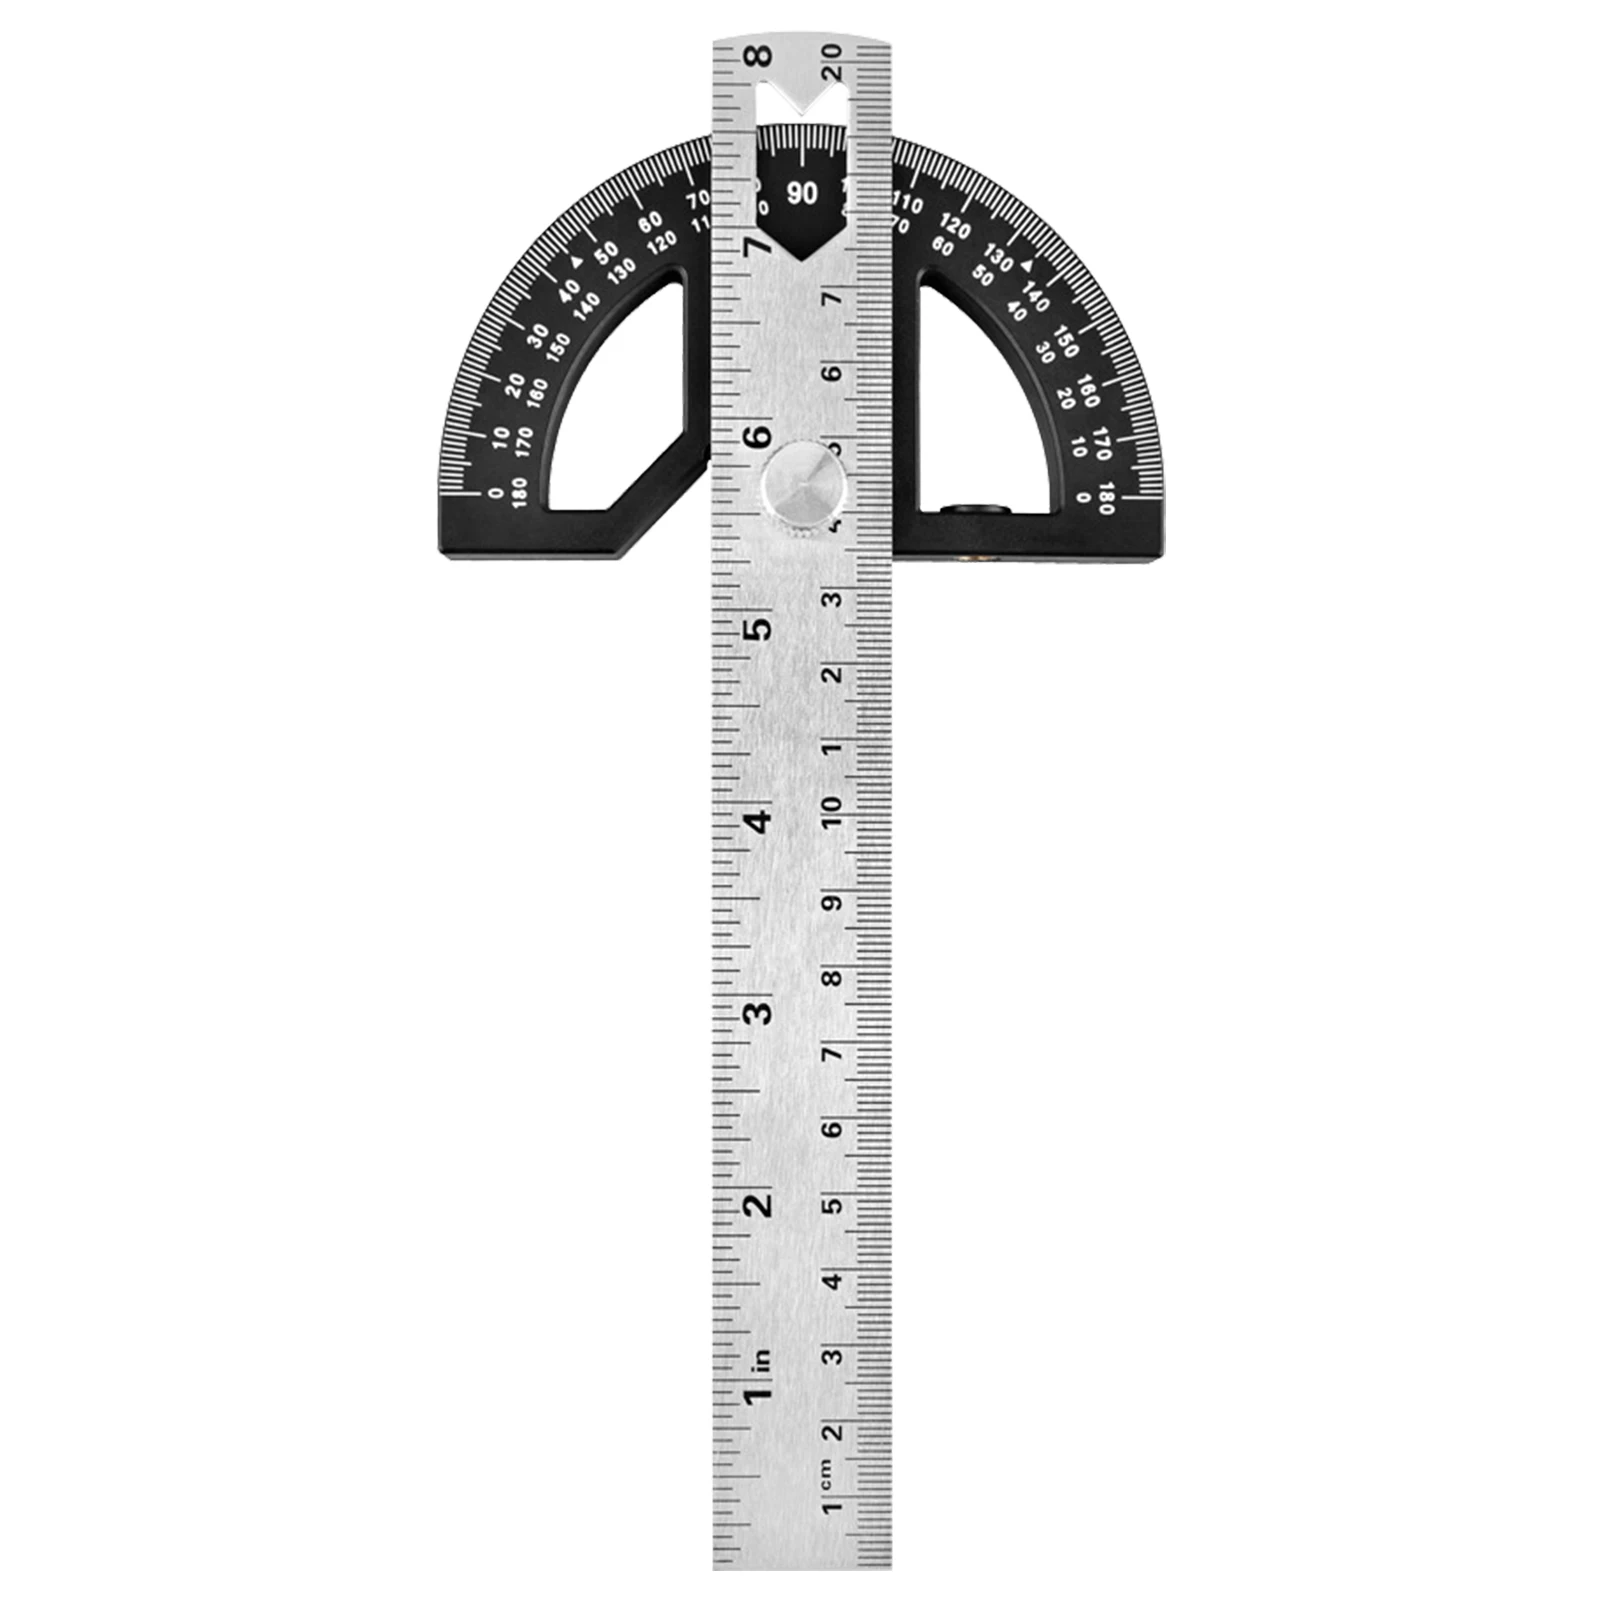 20cm Knurled Thumb Nut Inch Centimeter Precise Engineering 0-180 Degrees Adjustable Protractor With Ruler Steel Durable Woodwork